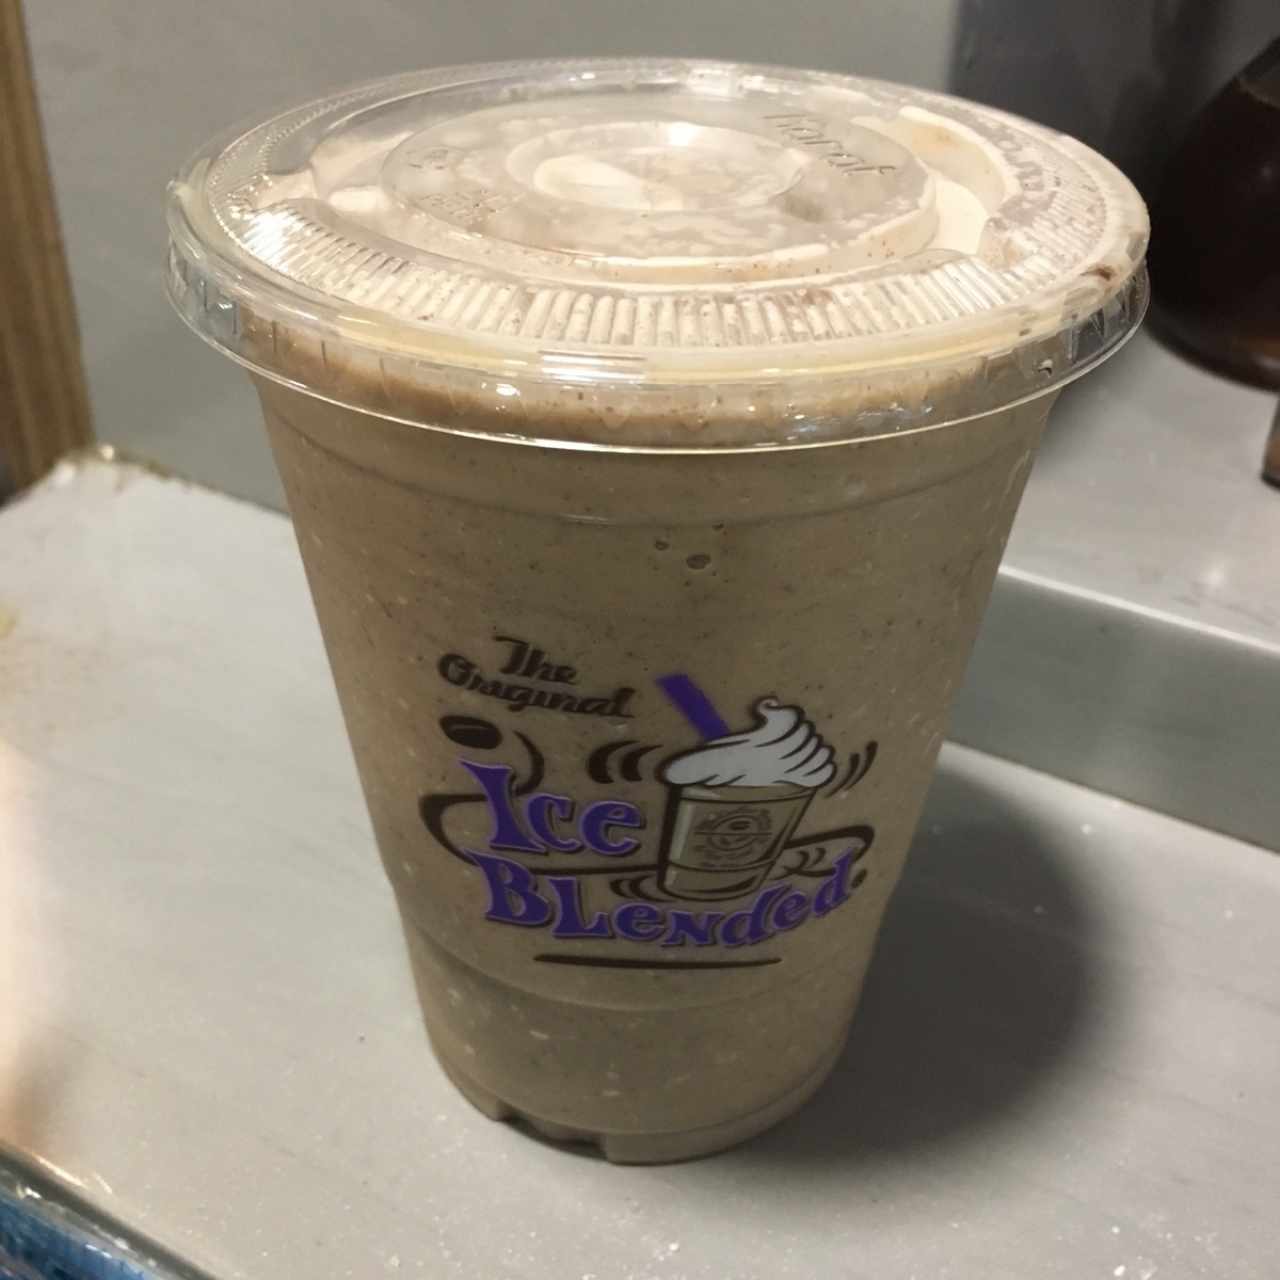 Ice blended cookies and cream